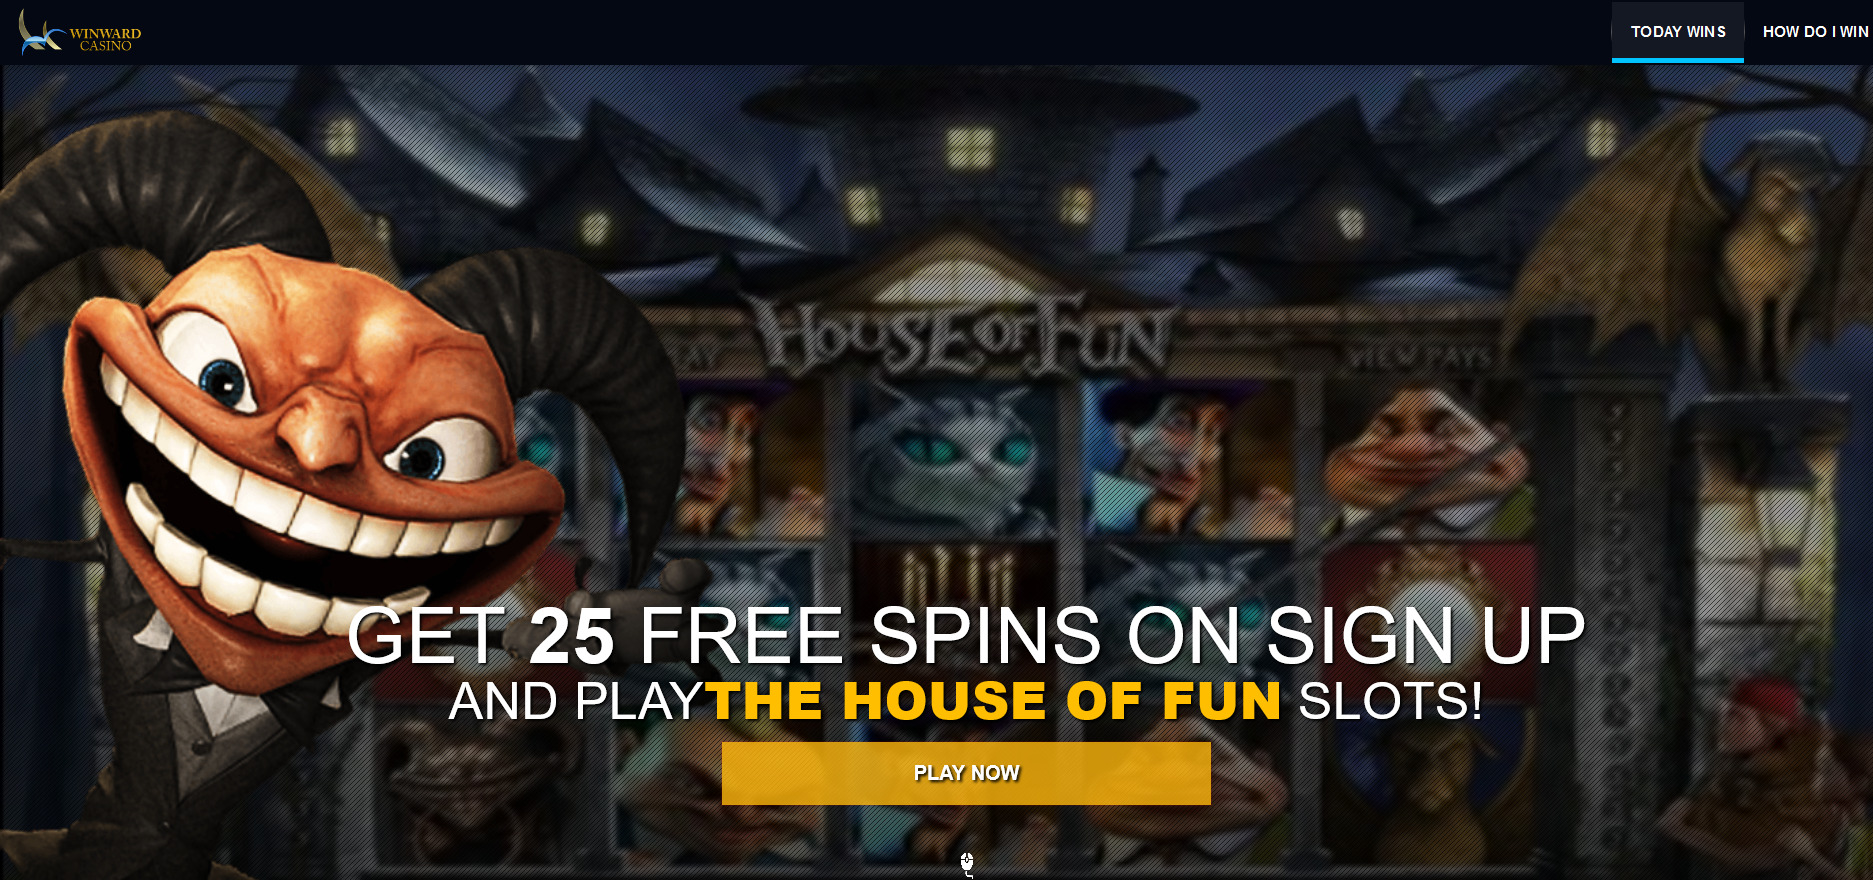 Winward Casino Review 675 60 Free Spins